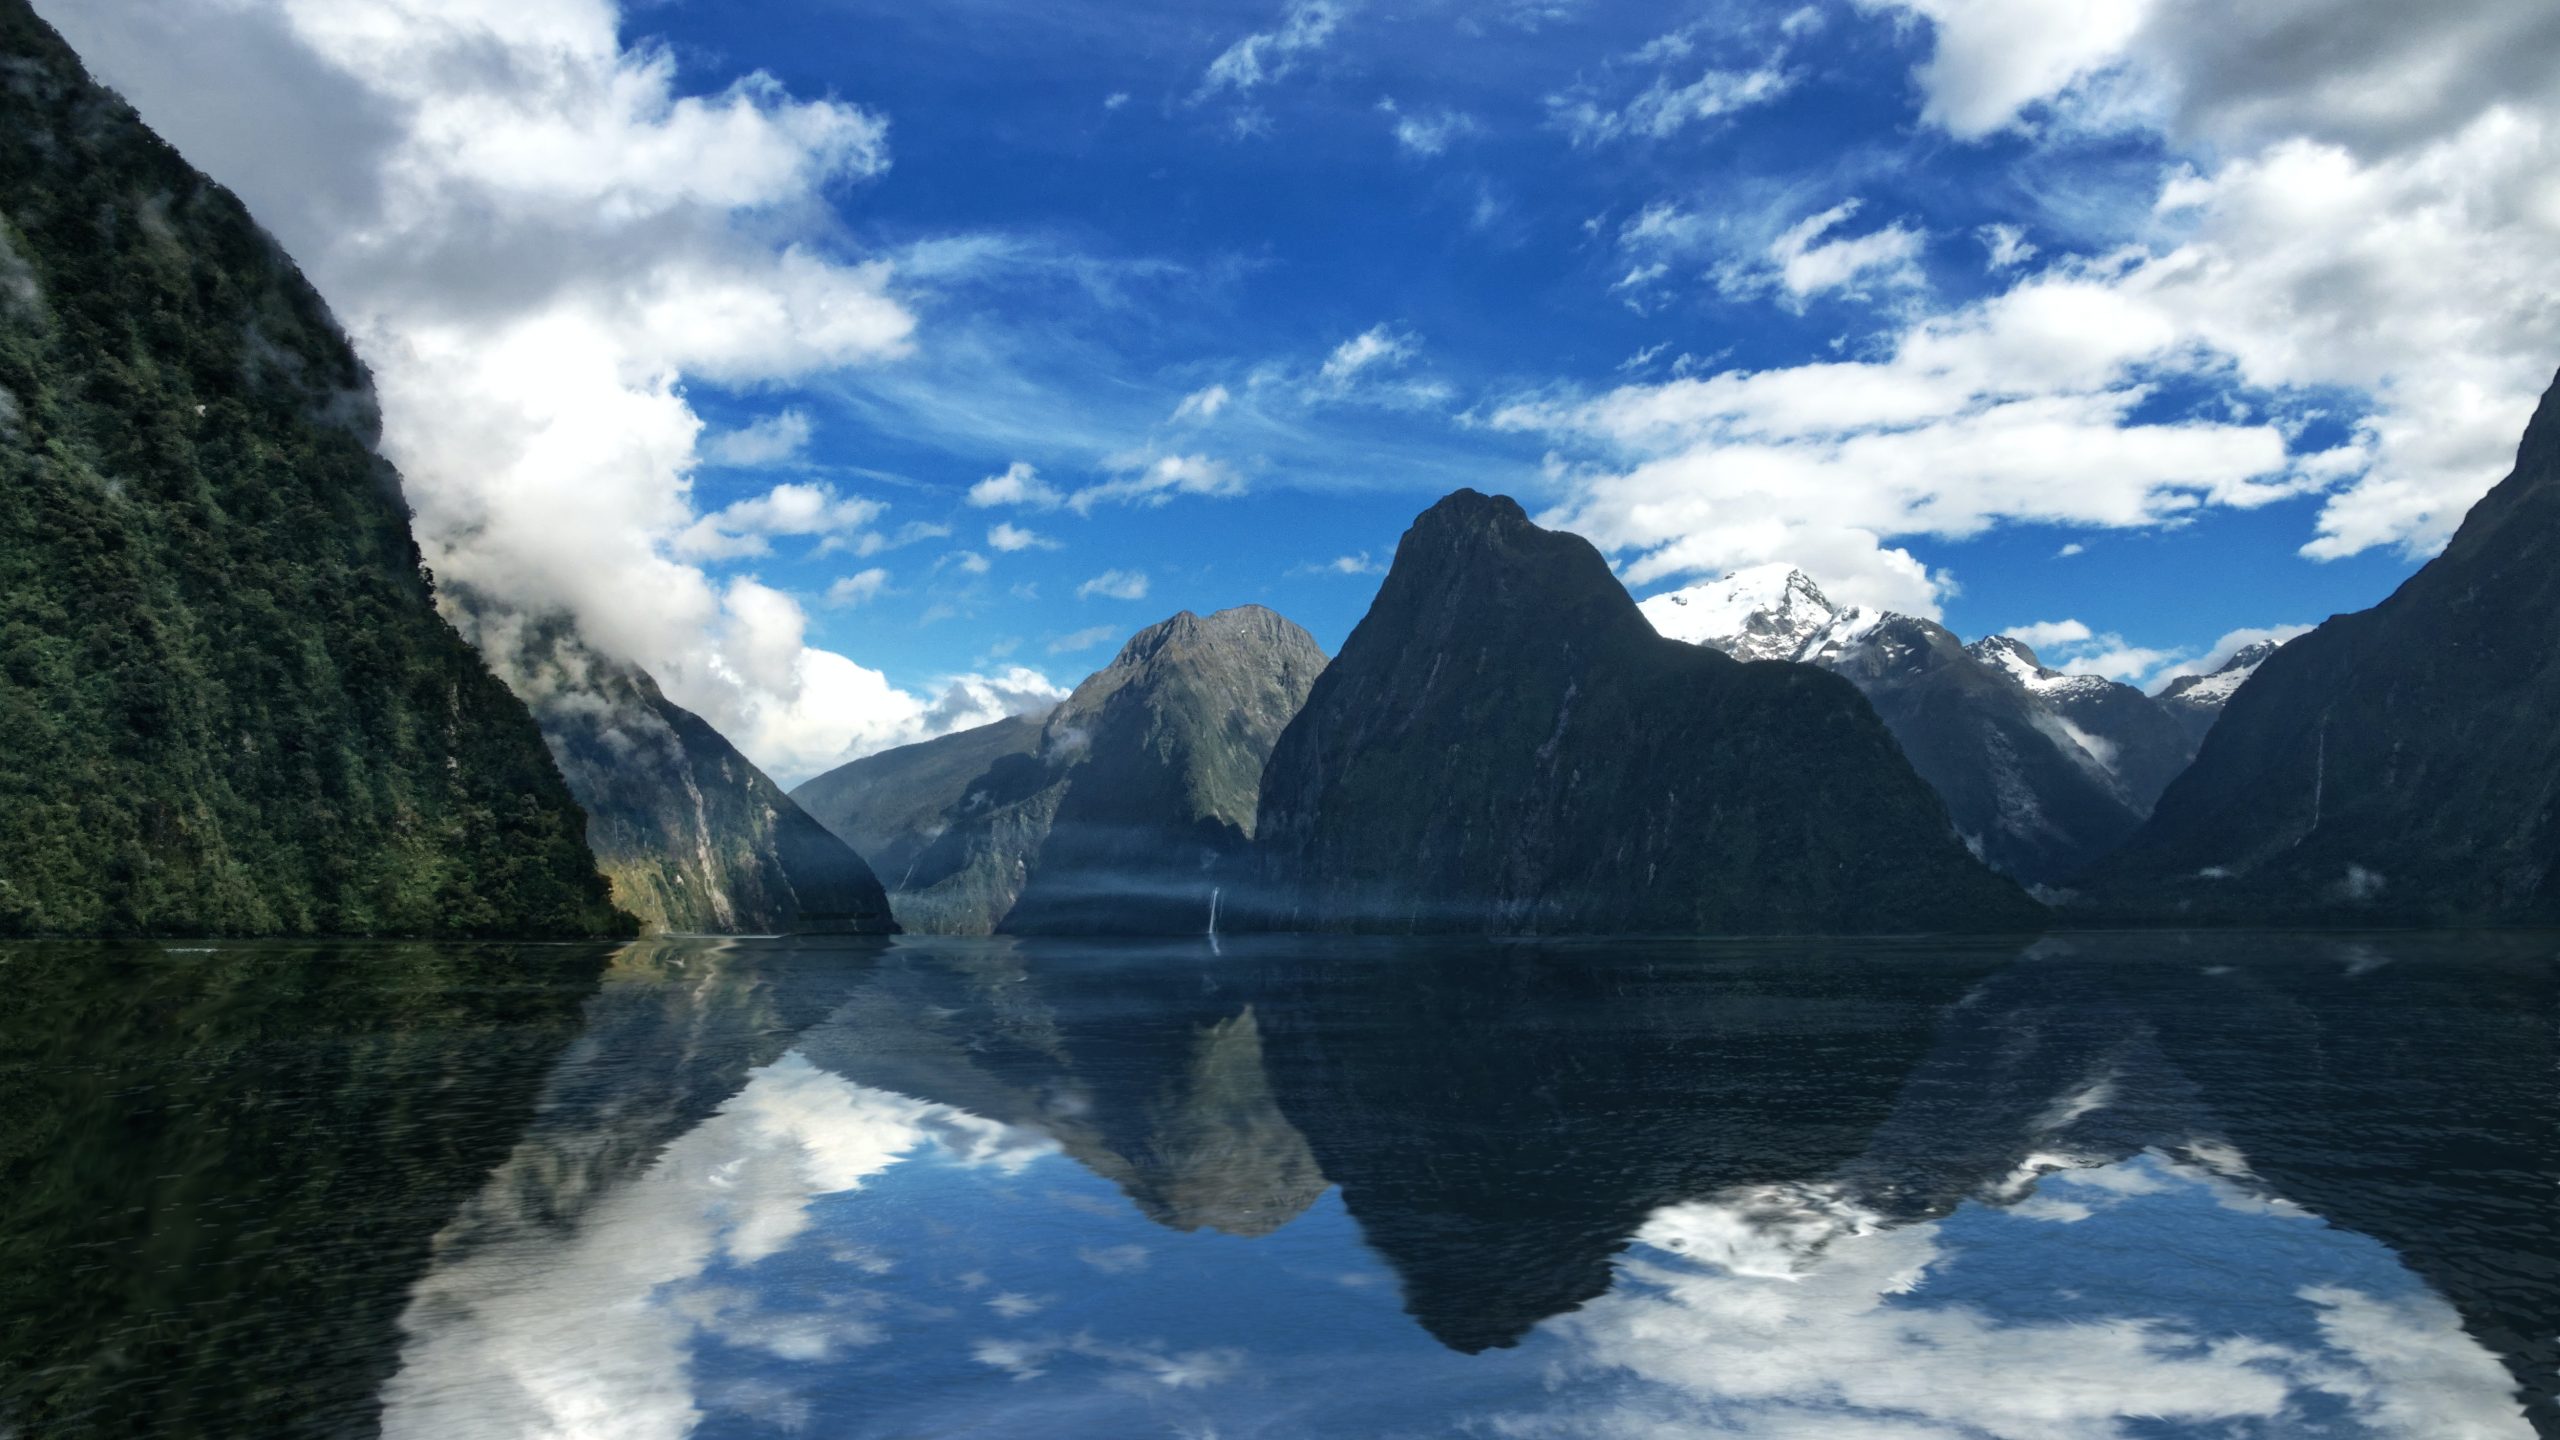 A fiord surrounded by steep mountains which are reflected in the glassy water.